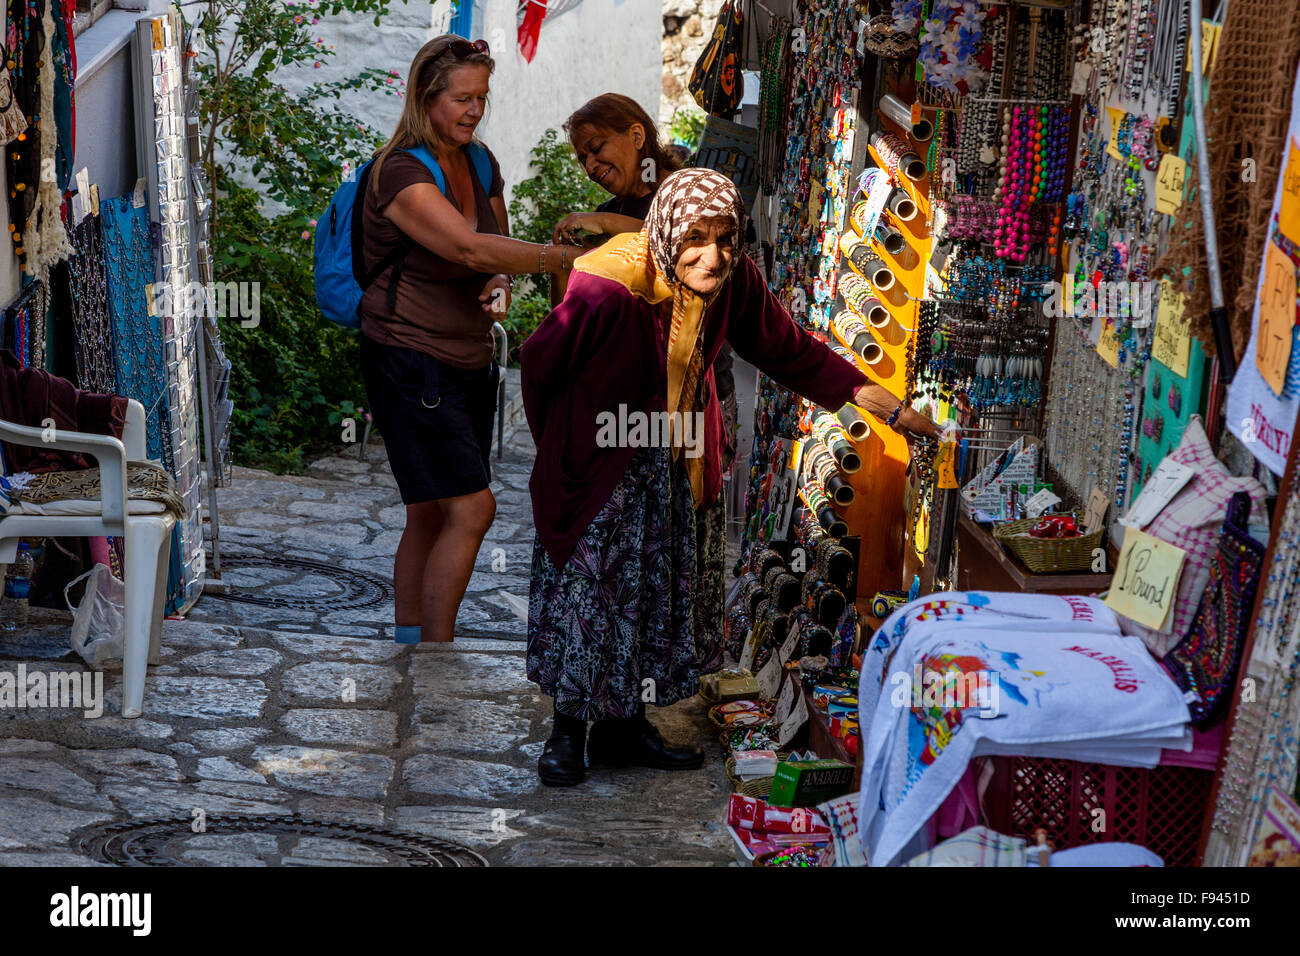 Tourists Buying Souvenirs From A Gift Shop In The Old Town Of Marmaris, Mugla Province, Turkey Stock Photo